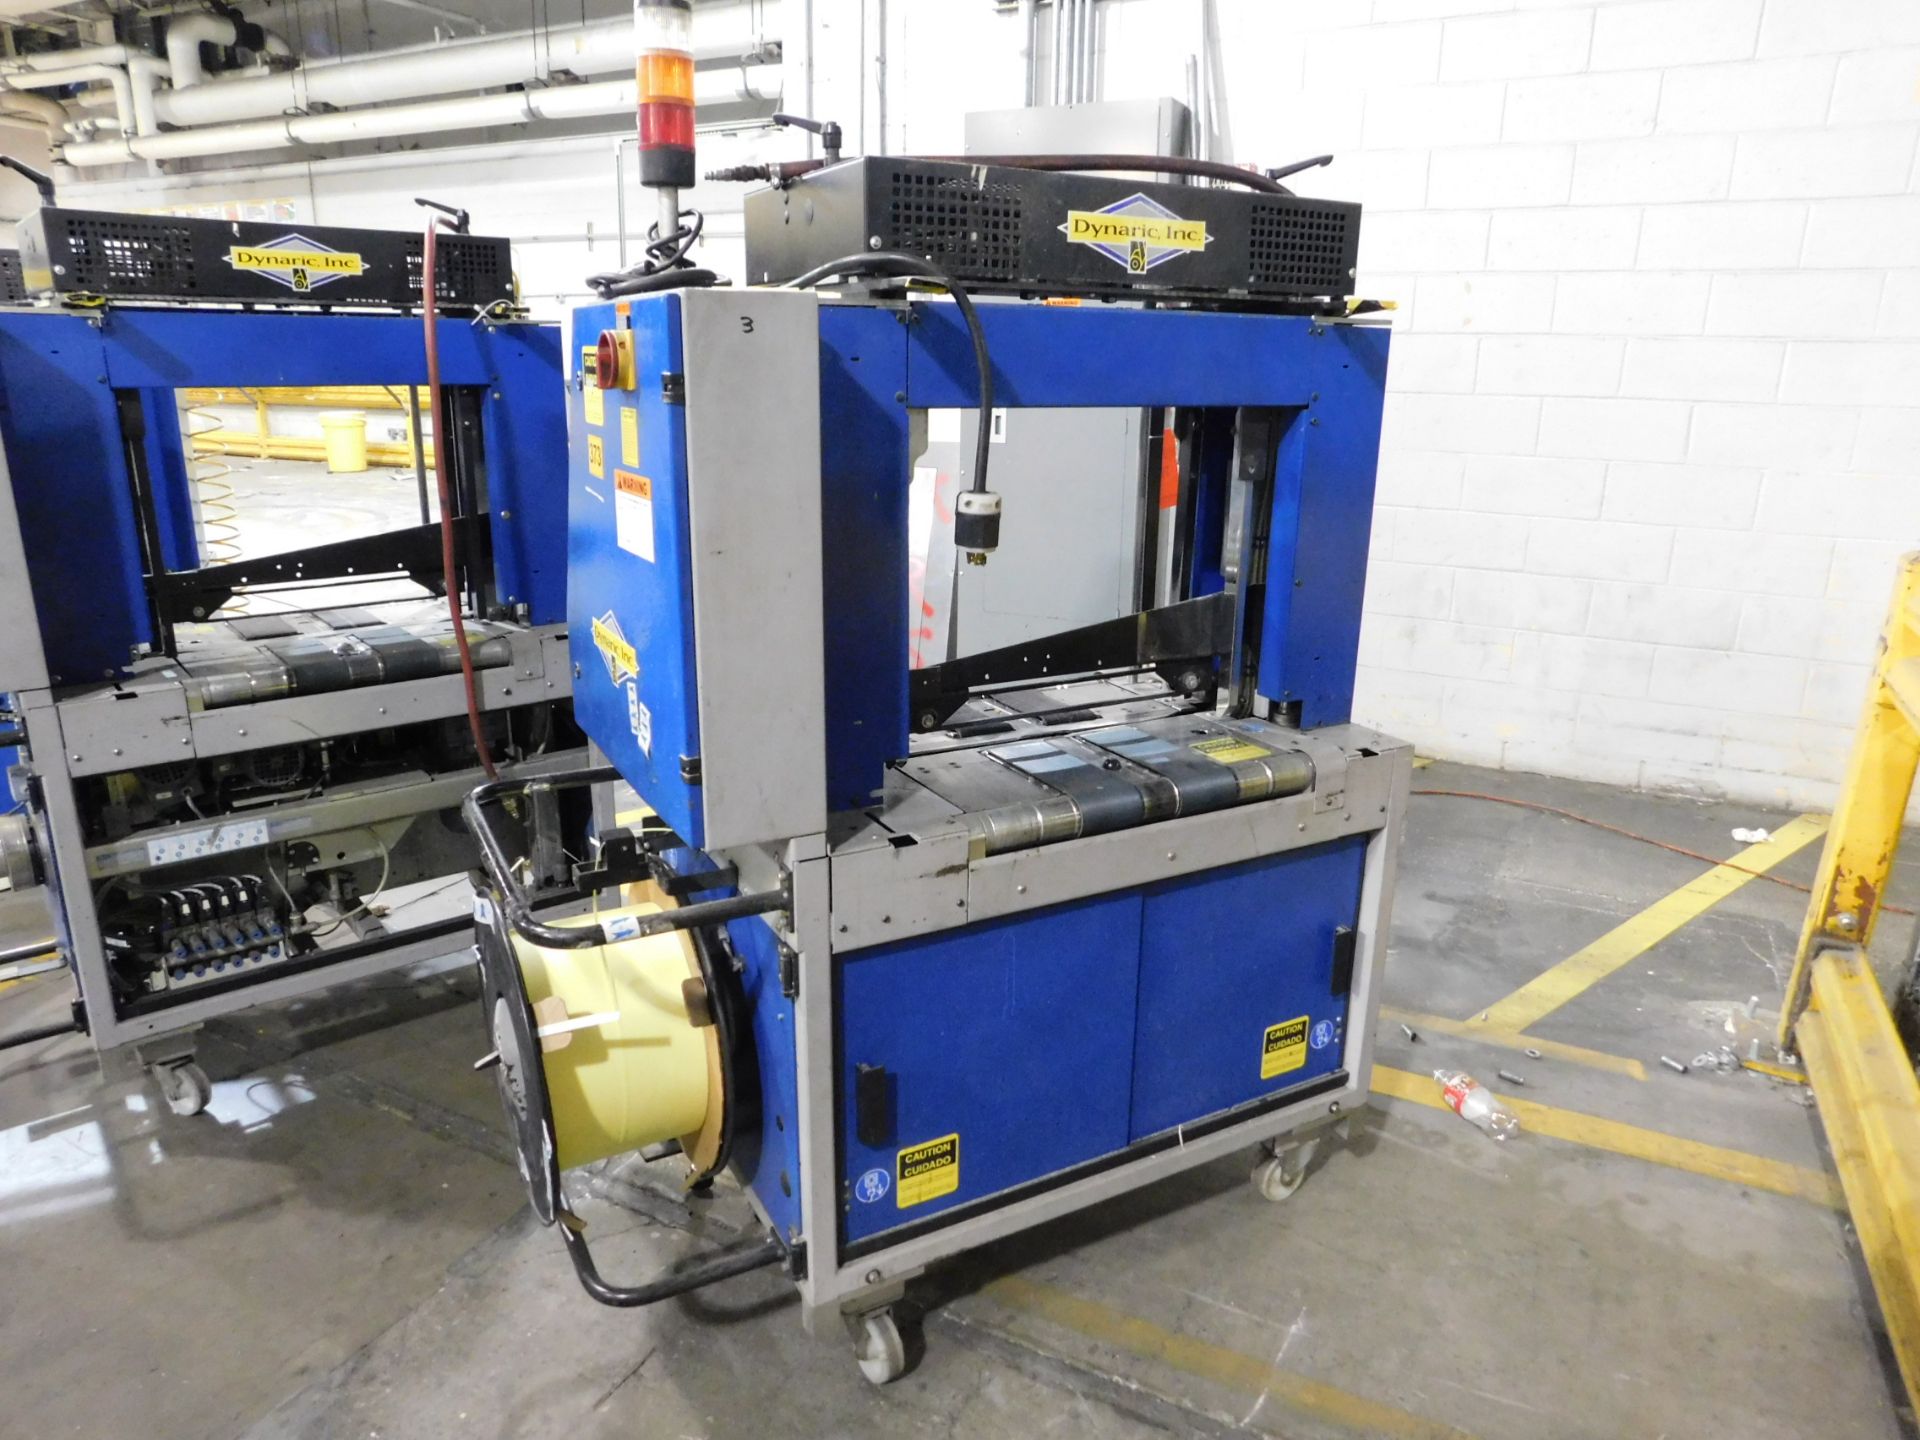 2000 Dynark banding machine with discharge roller conveyor, 5 ft. long by 18 in. wide, mobile, asset - Image 2 of 3